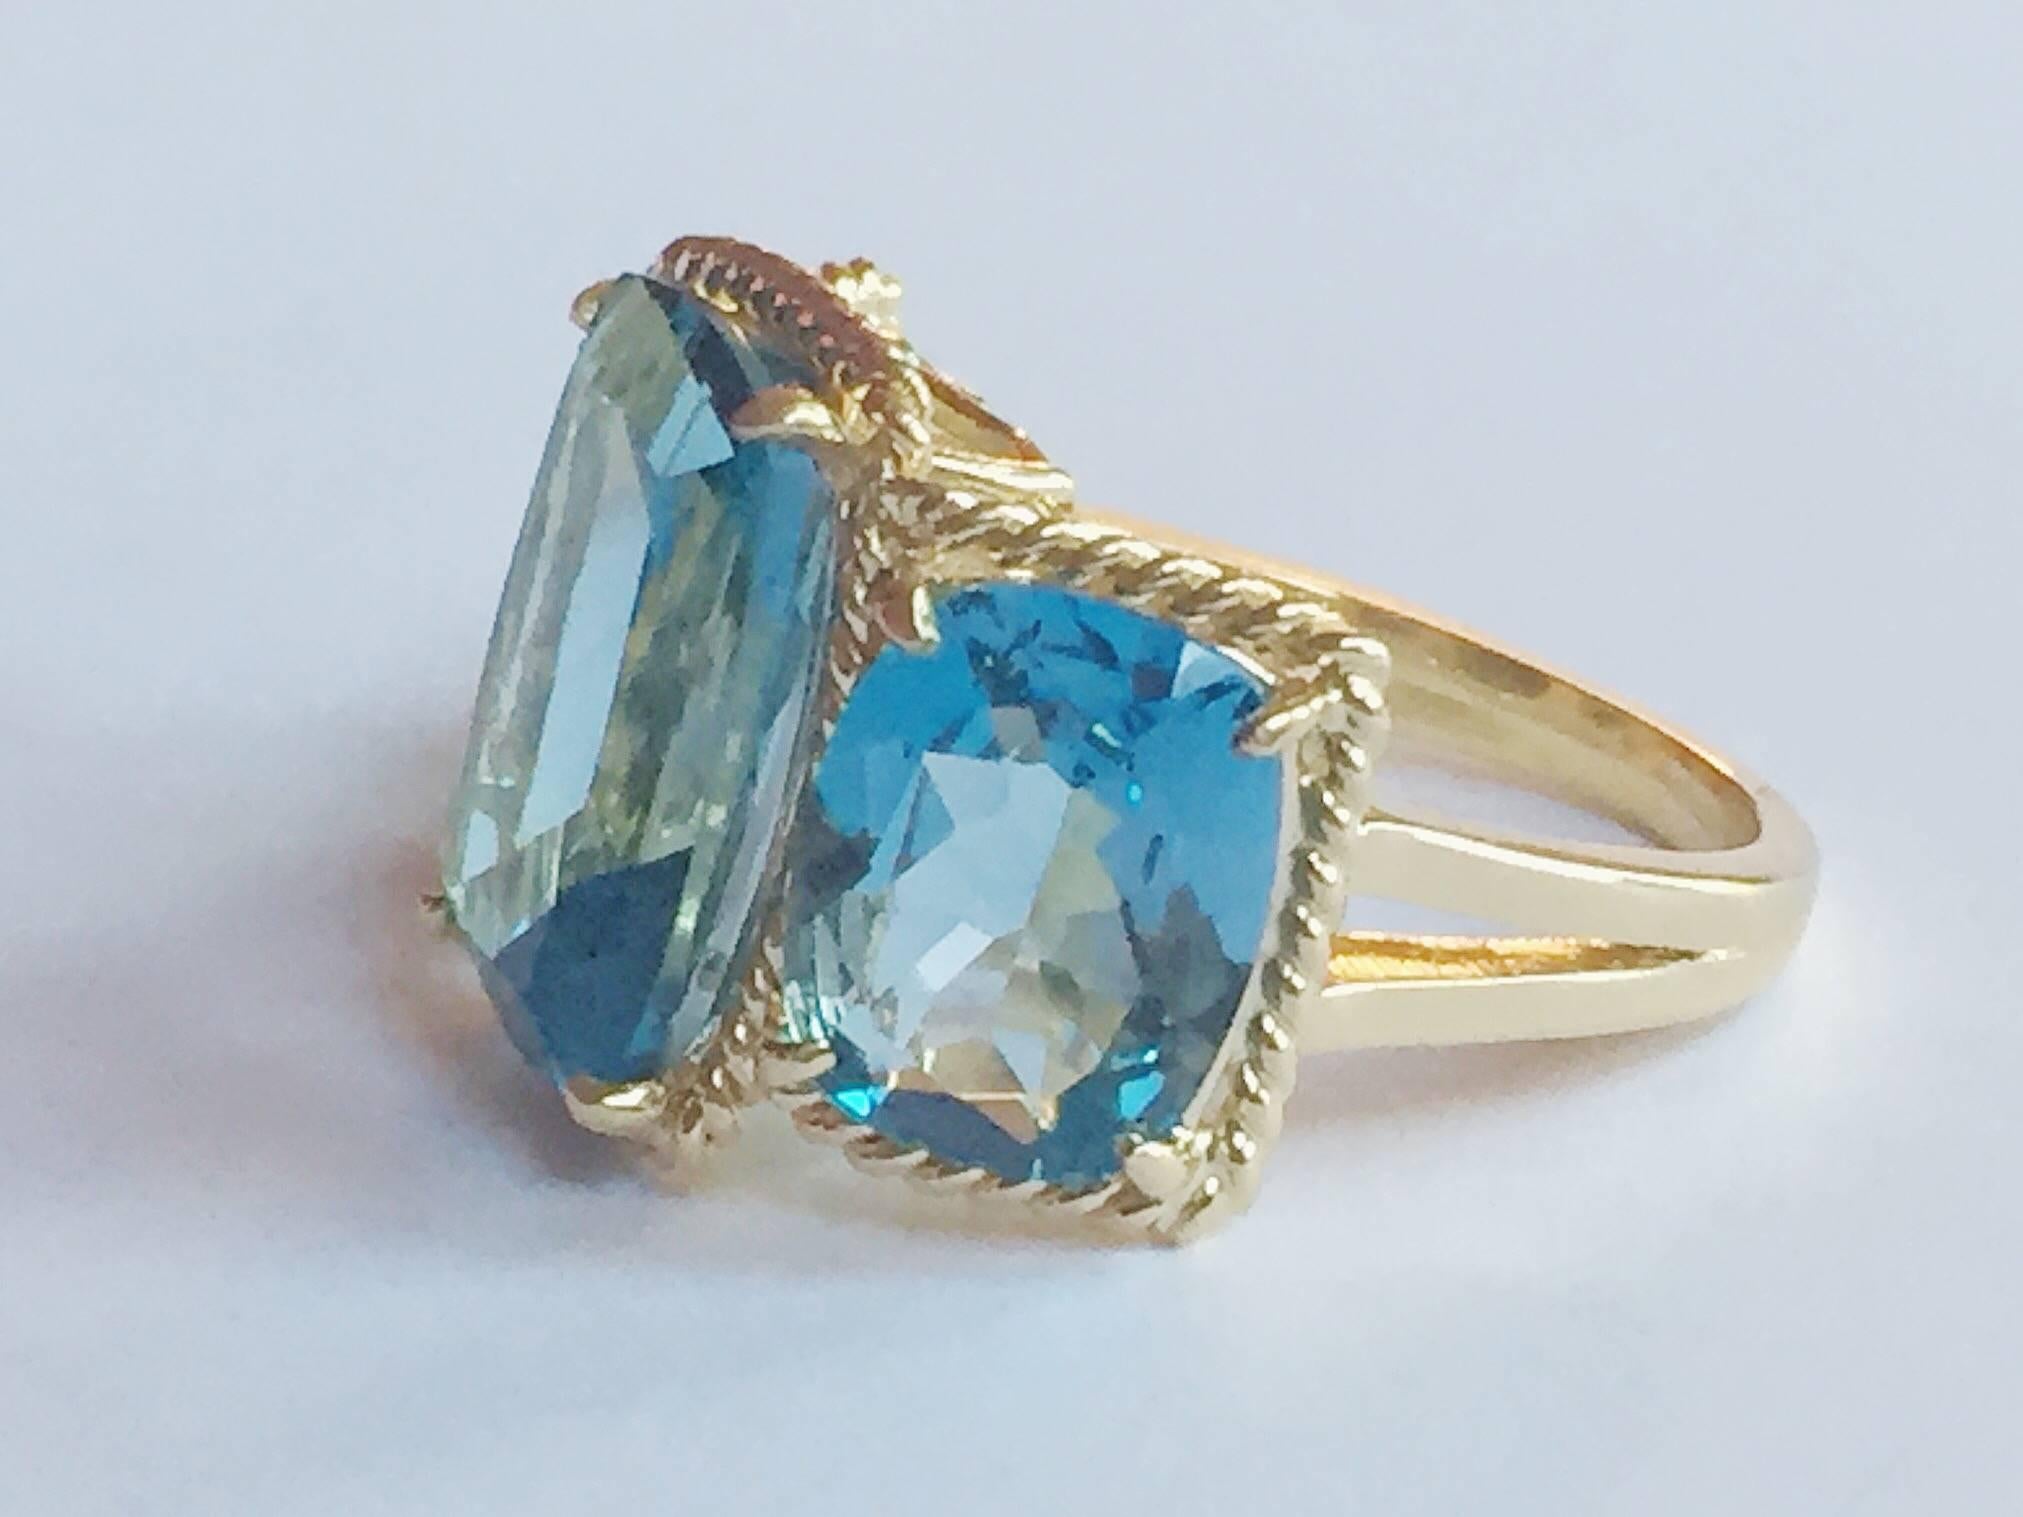 Elegant 18kt Yellow Three Stone Ring with Rope Twist Border with split shank detail. The ring features three faceted Blue Topaz cushion cut stones surrounded by twisted gold rope. The center Blue Topaz stone measures 5/8